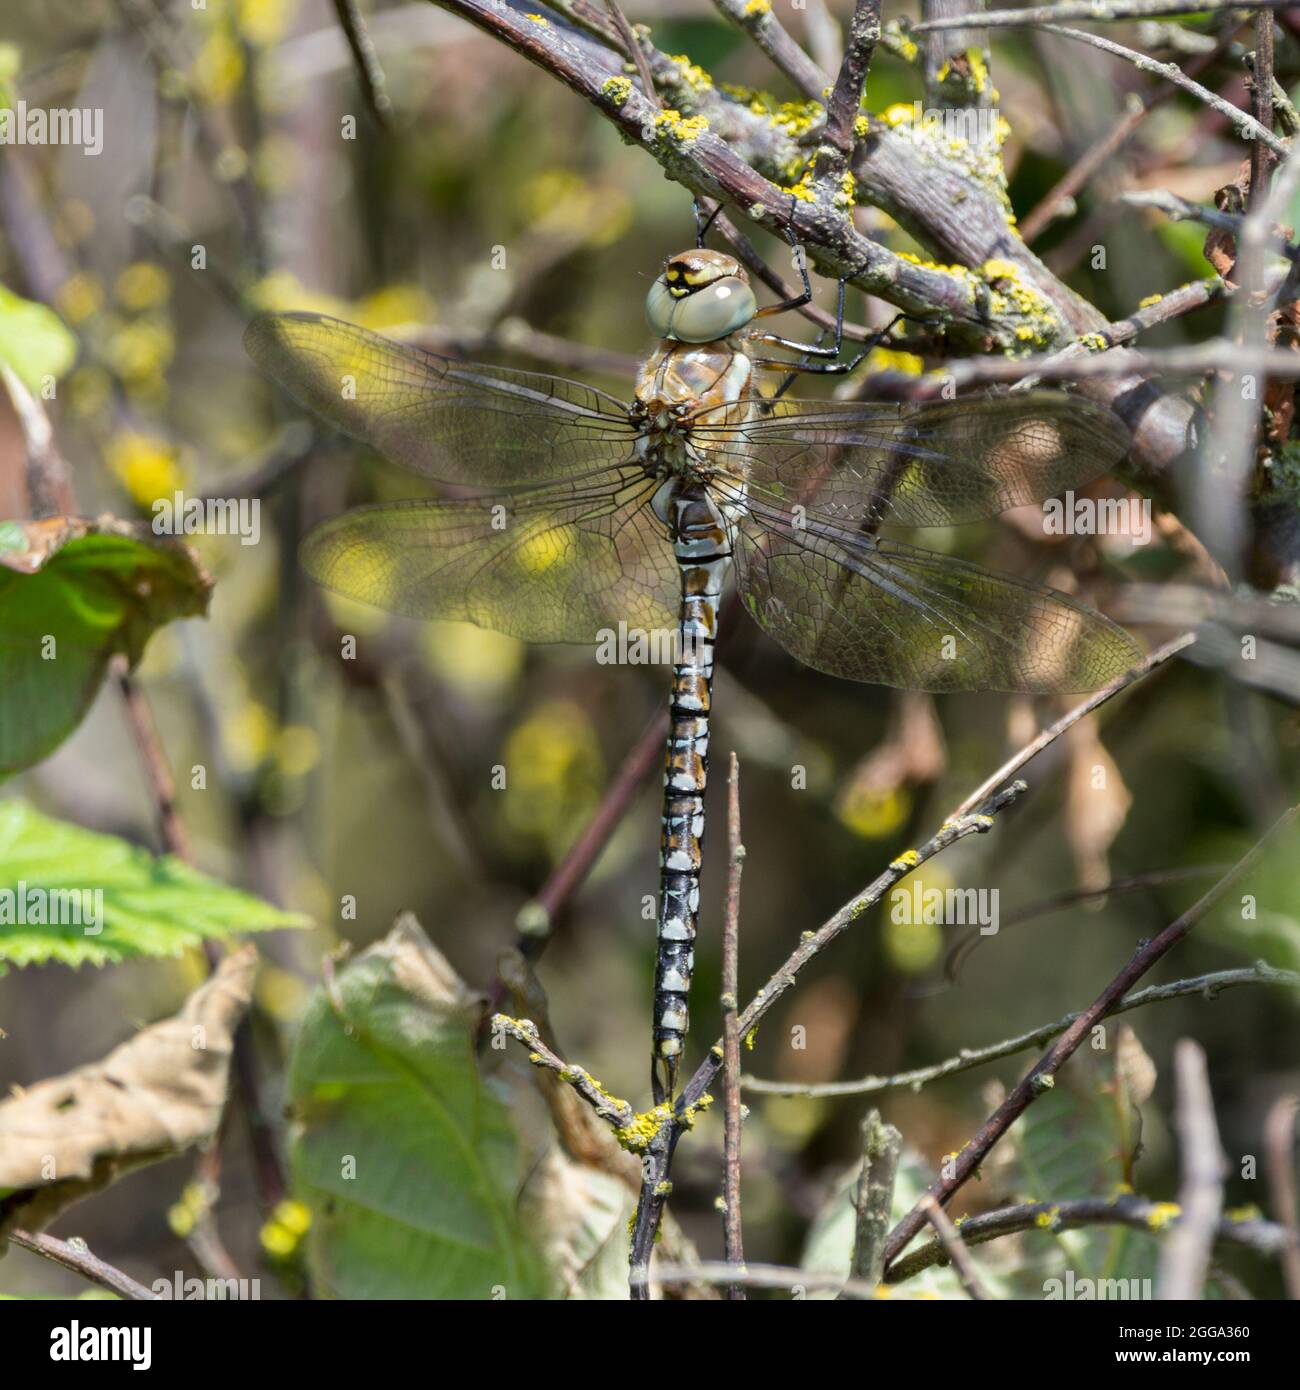 Large uk southern hawker (or similar) resting in bushes has large compound eyes together blue grey and brown colours colors black bands along abdomen Stock Photo